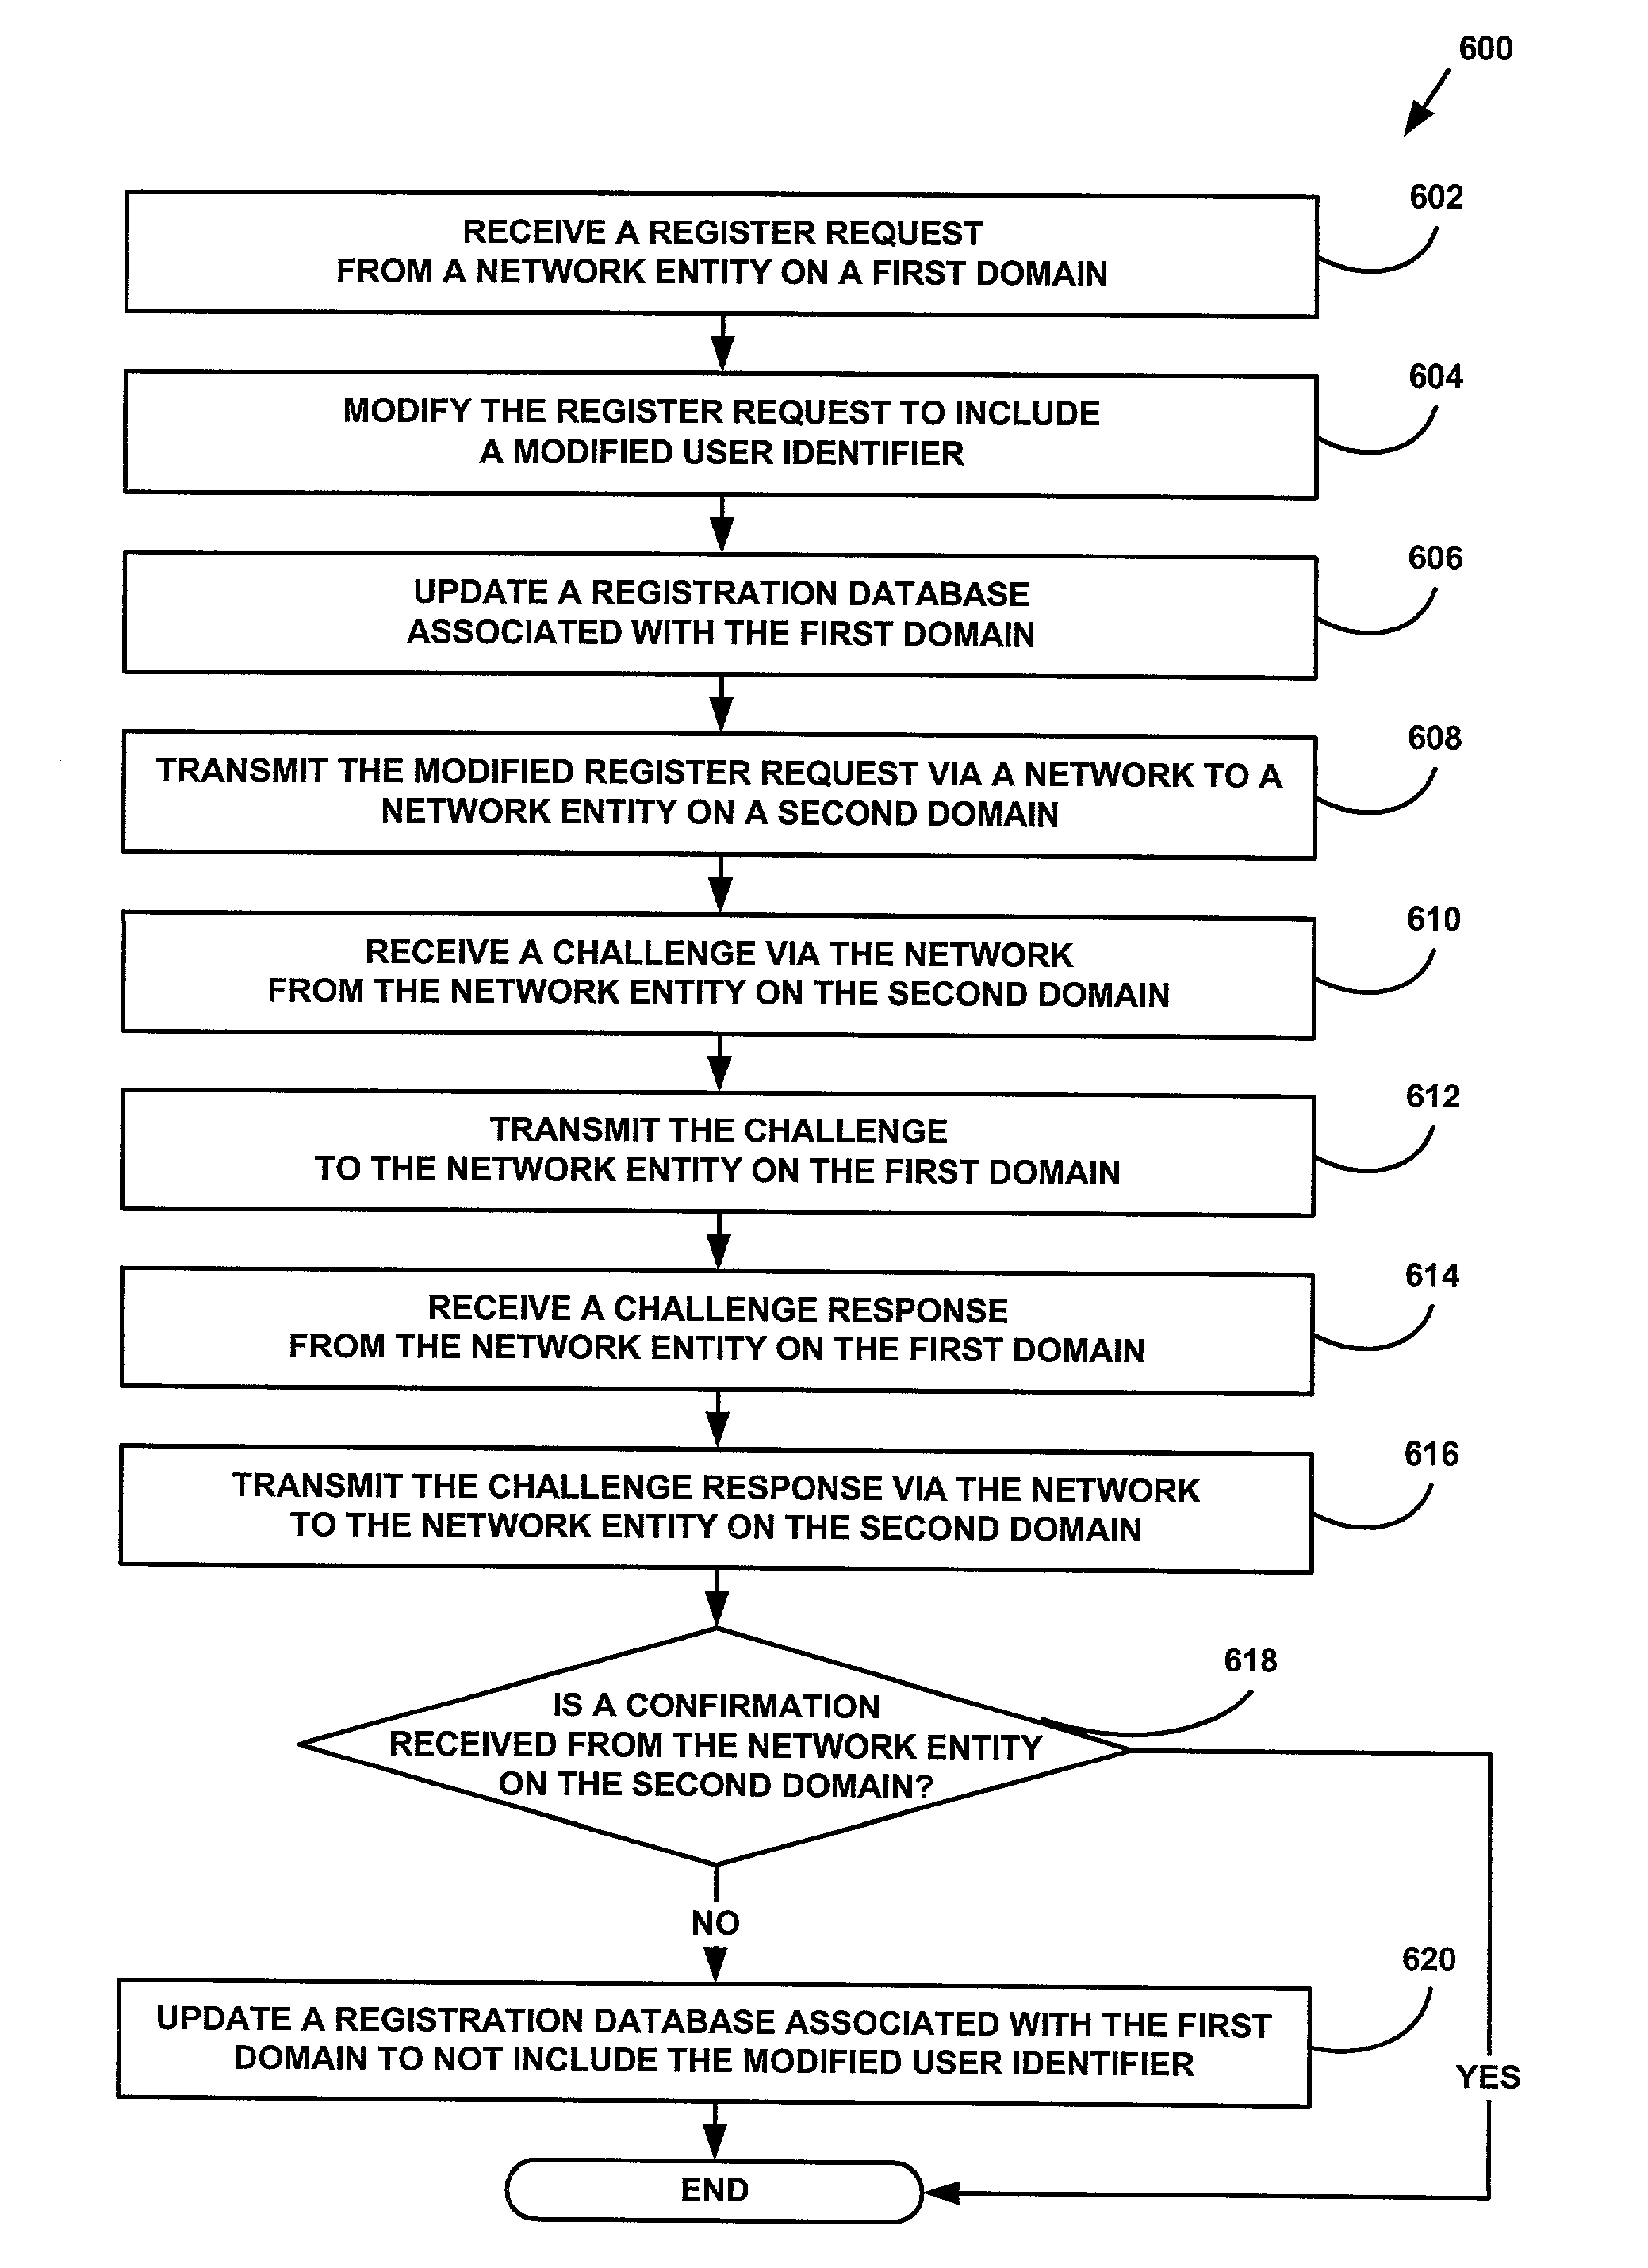 System and method for providing user mobility handling in a network telephony system